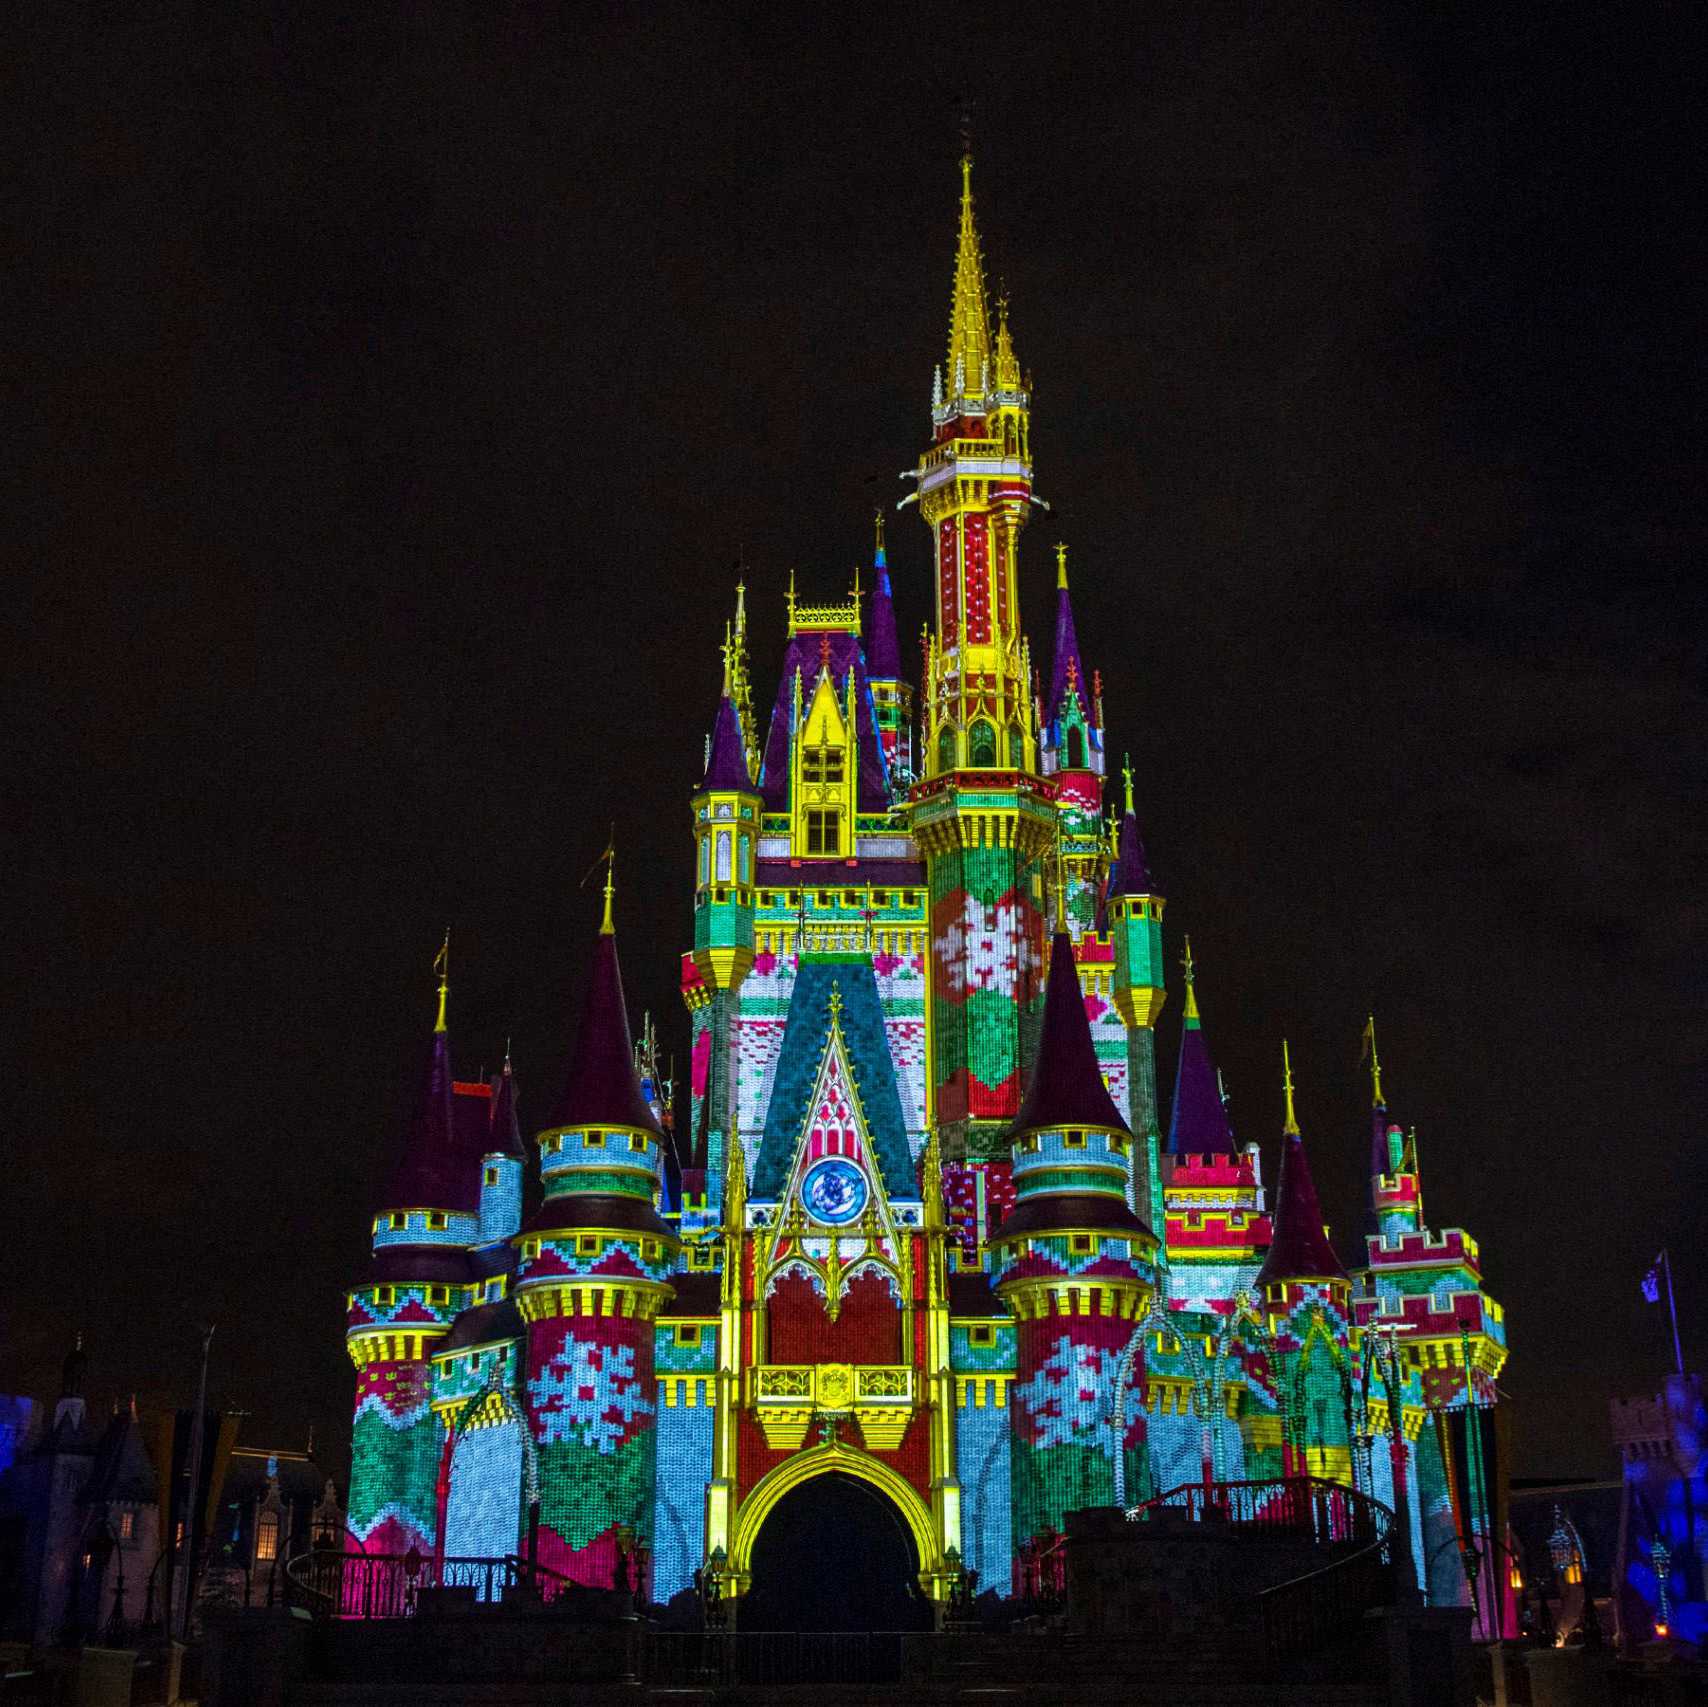 Disney World announces new events for 50th anniversary